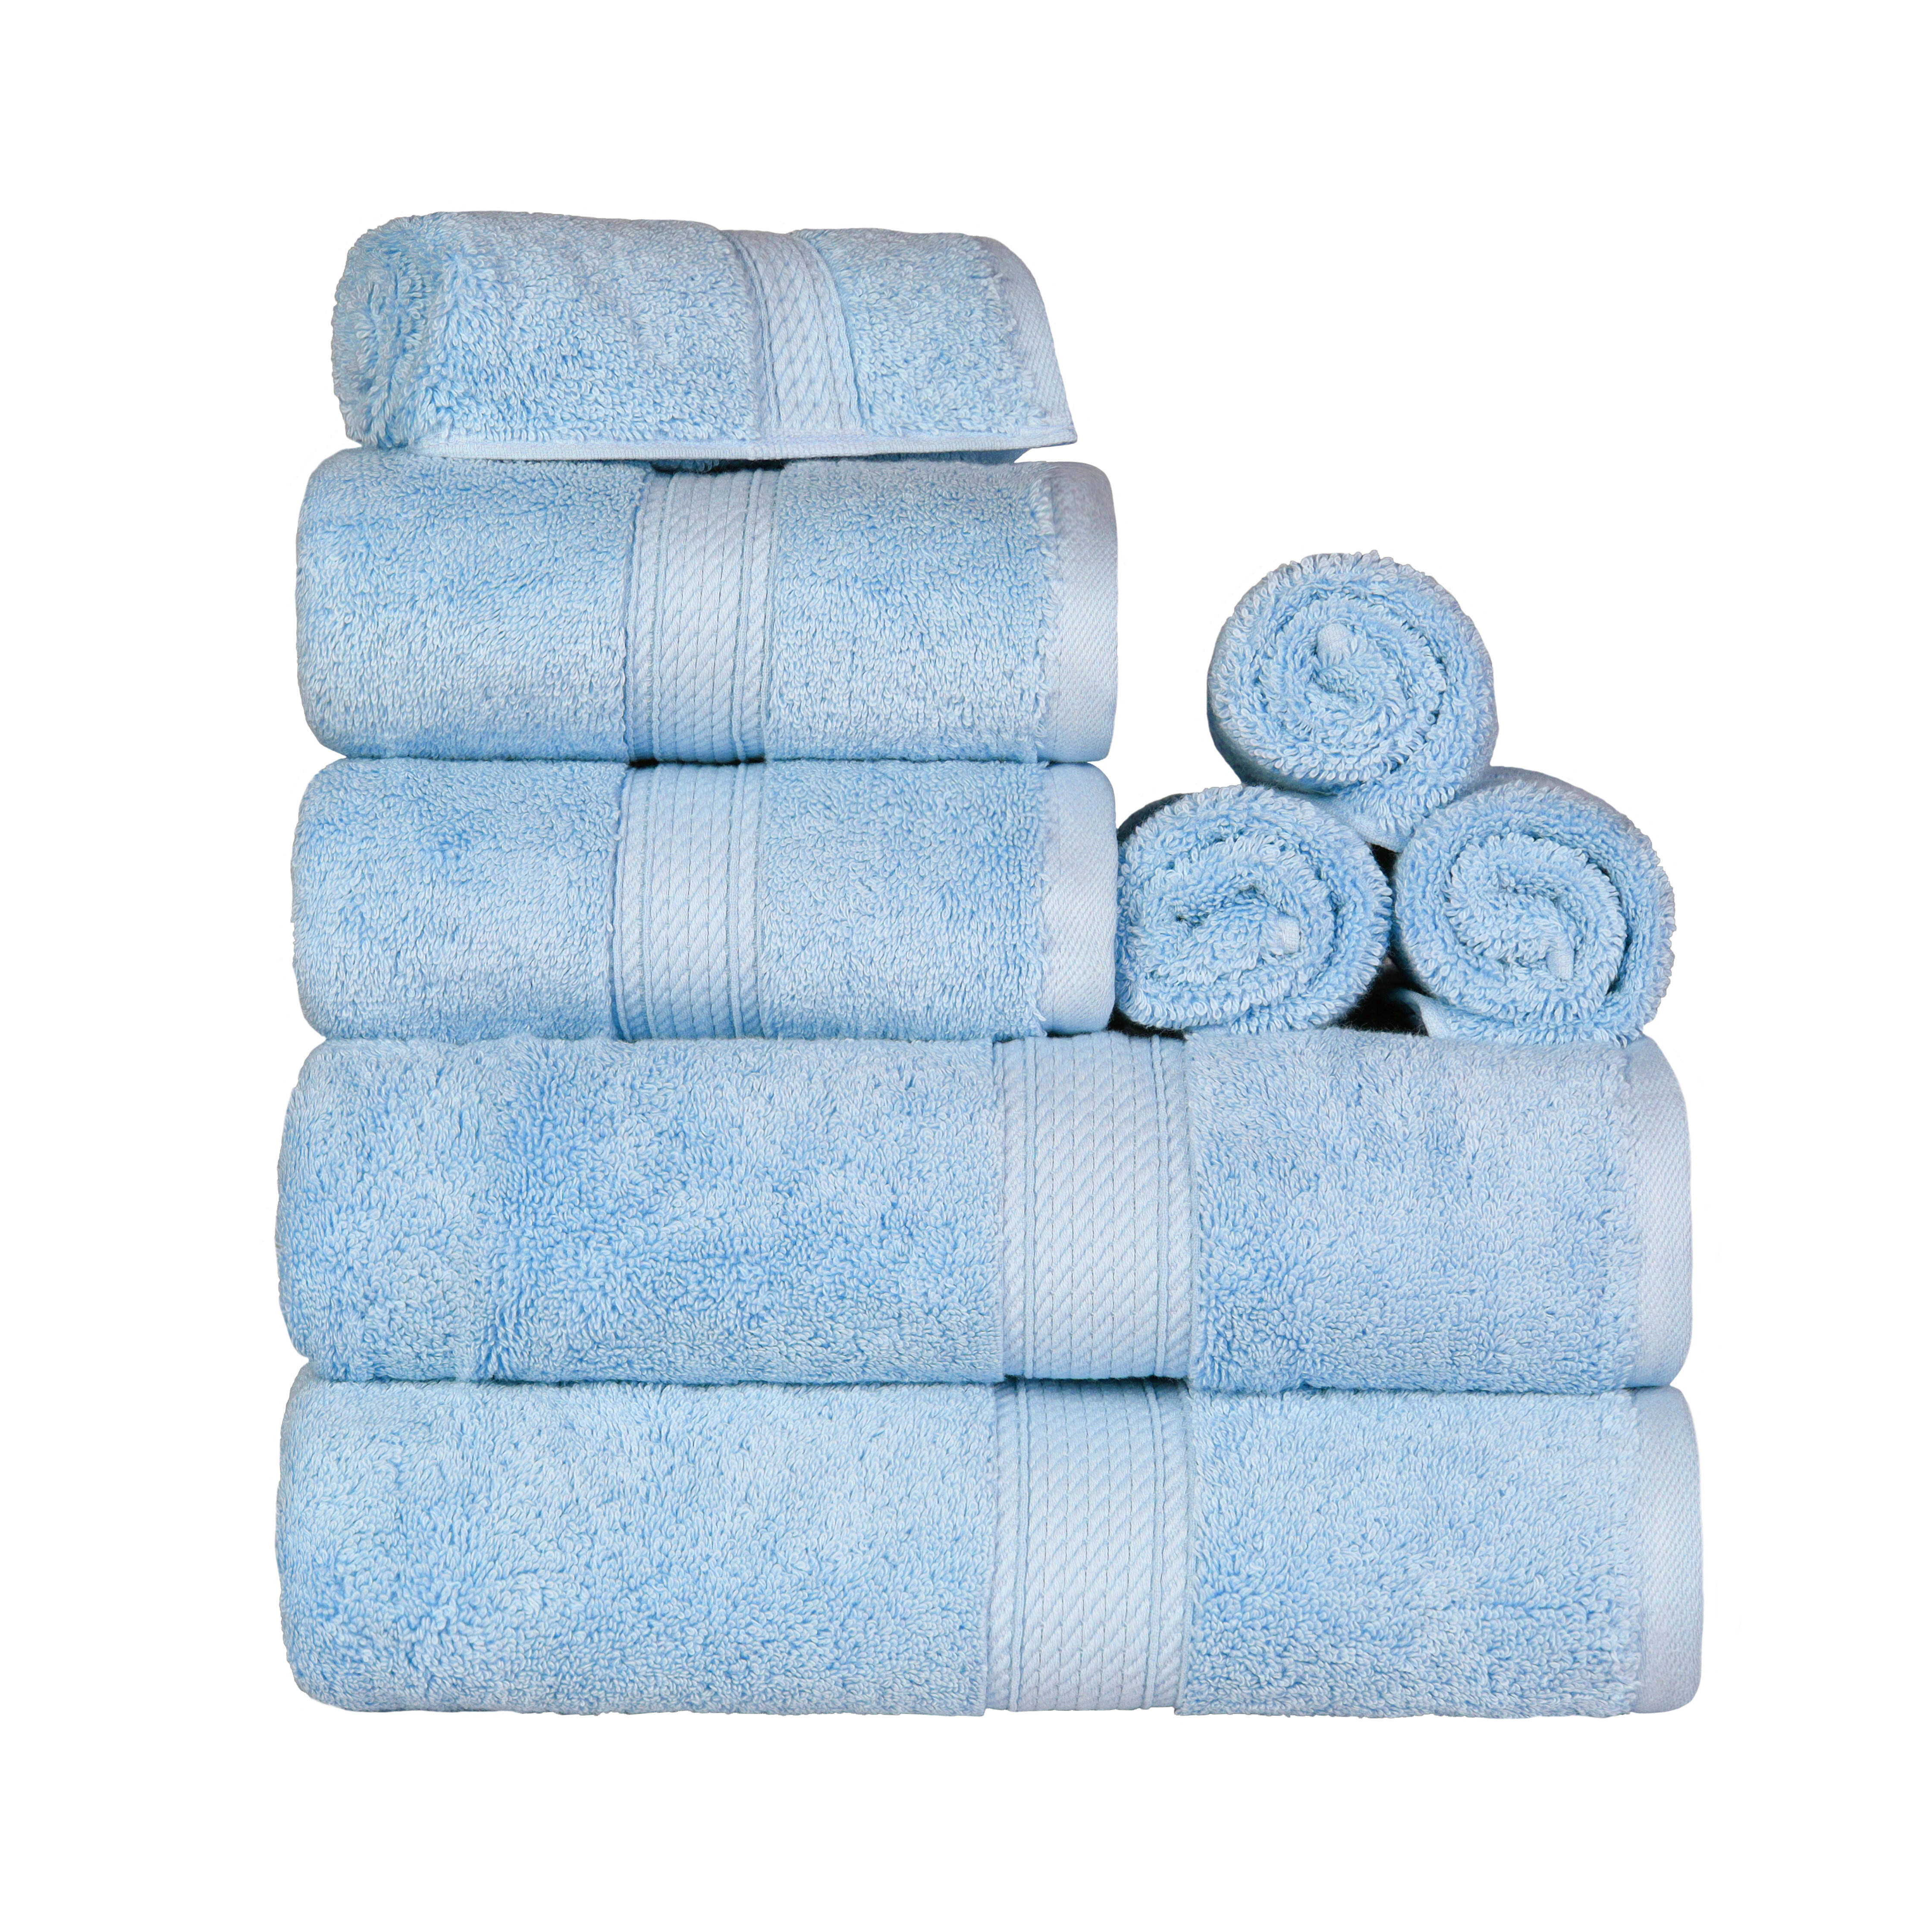 900 GSM Egyptian Cotton Towel Set of 8, Plush Absorbent Face, Hand